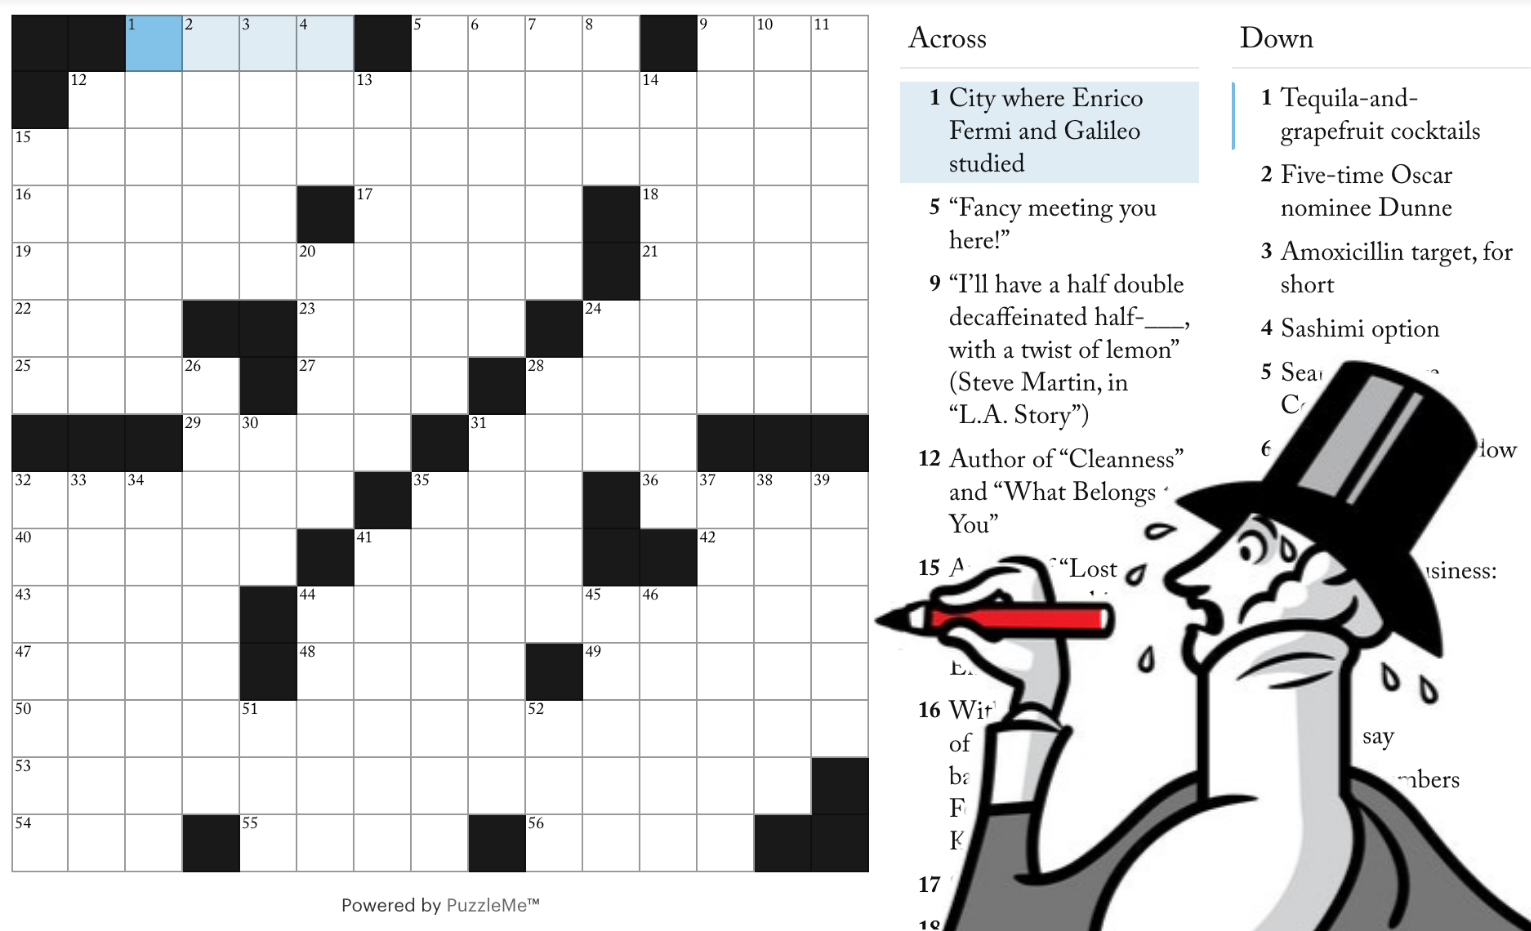 The New Yorker leans into crossword puzzles online and, now, in print